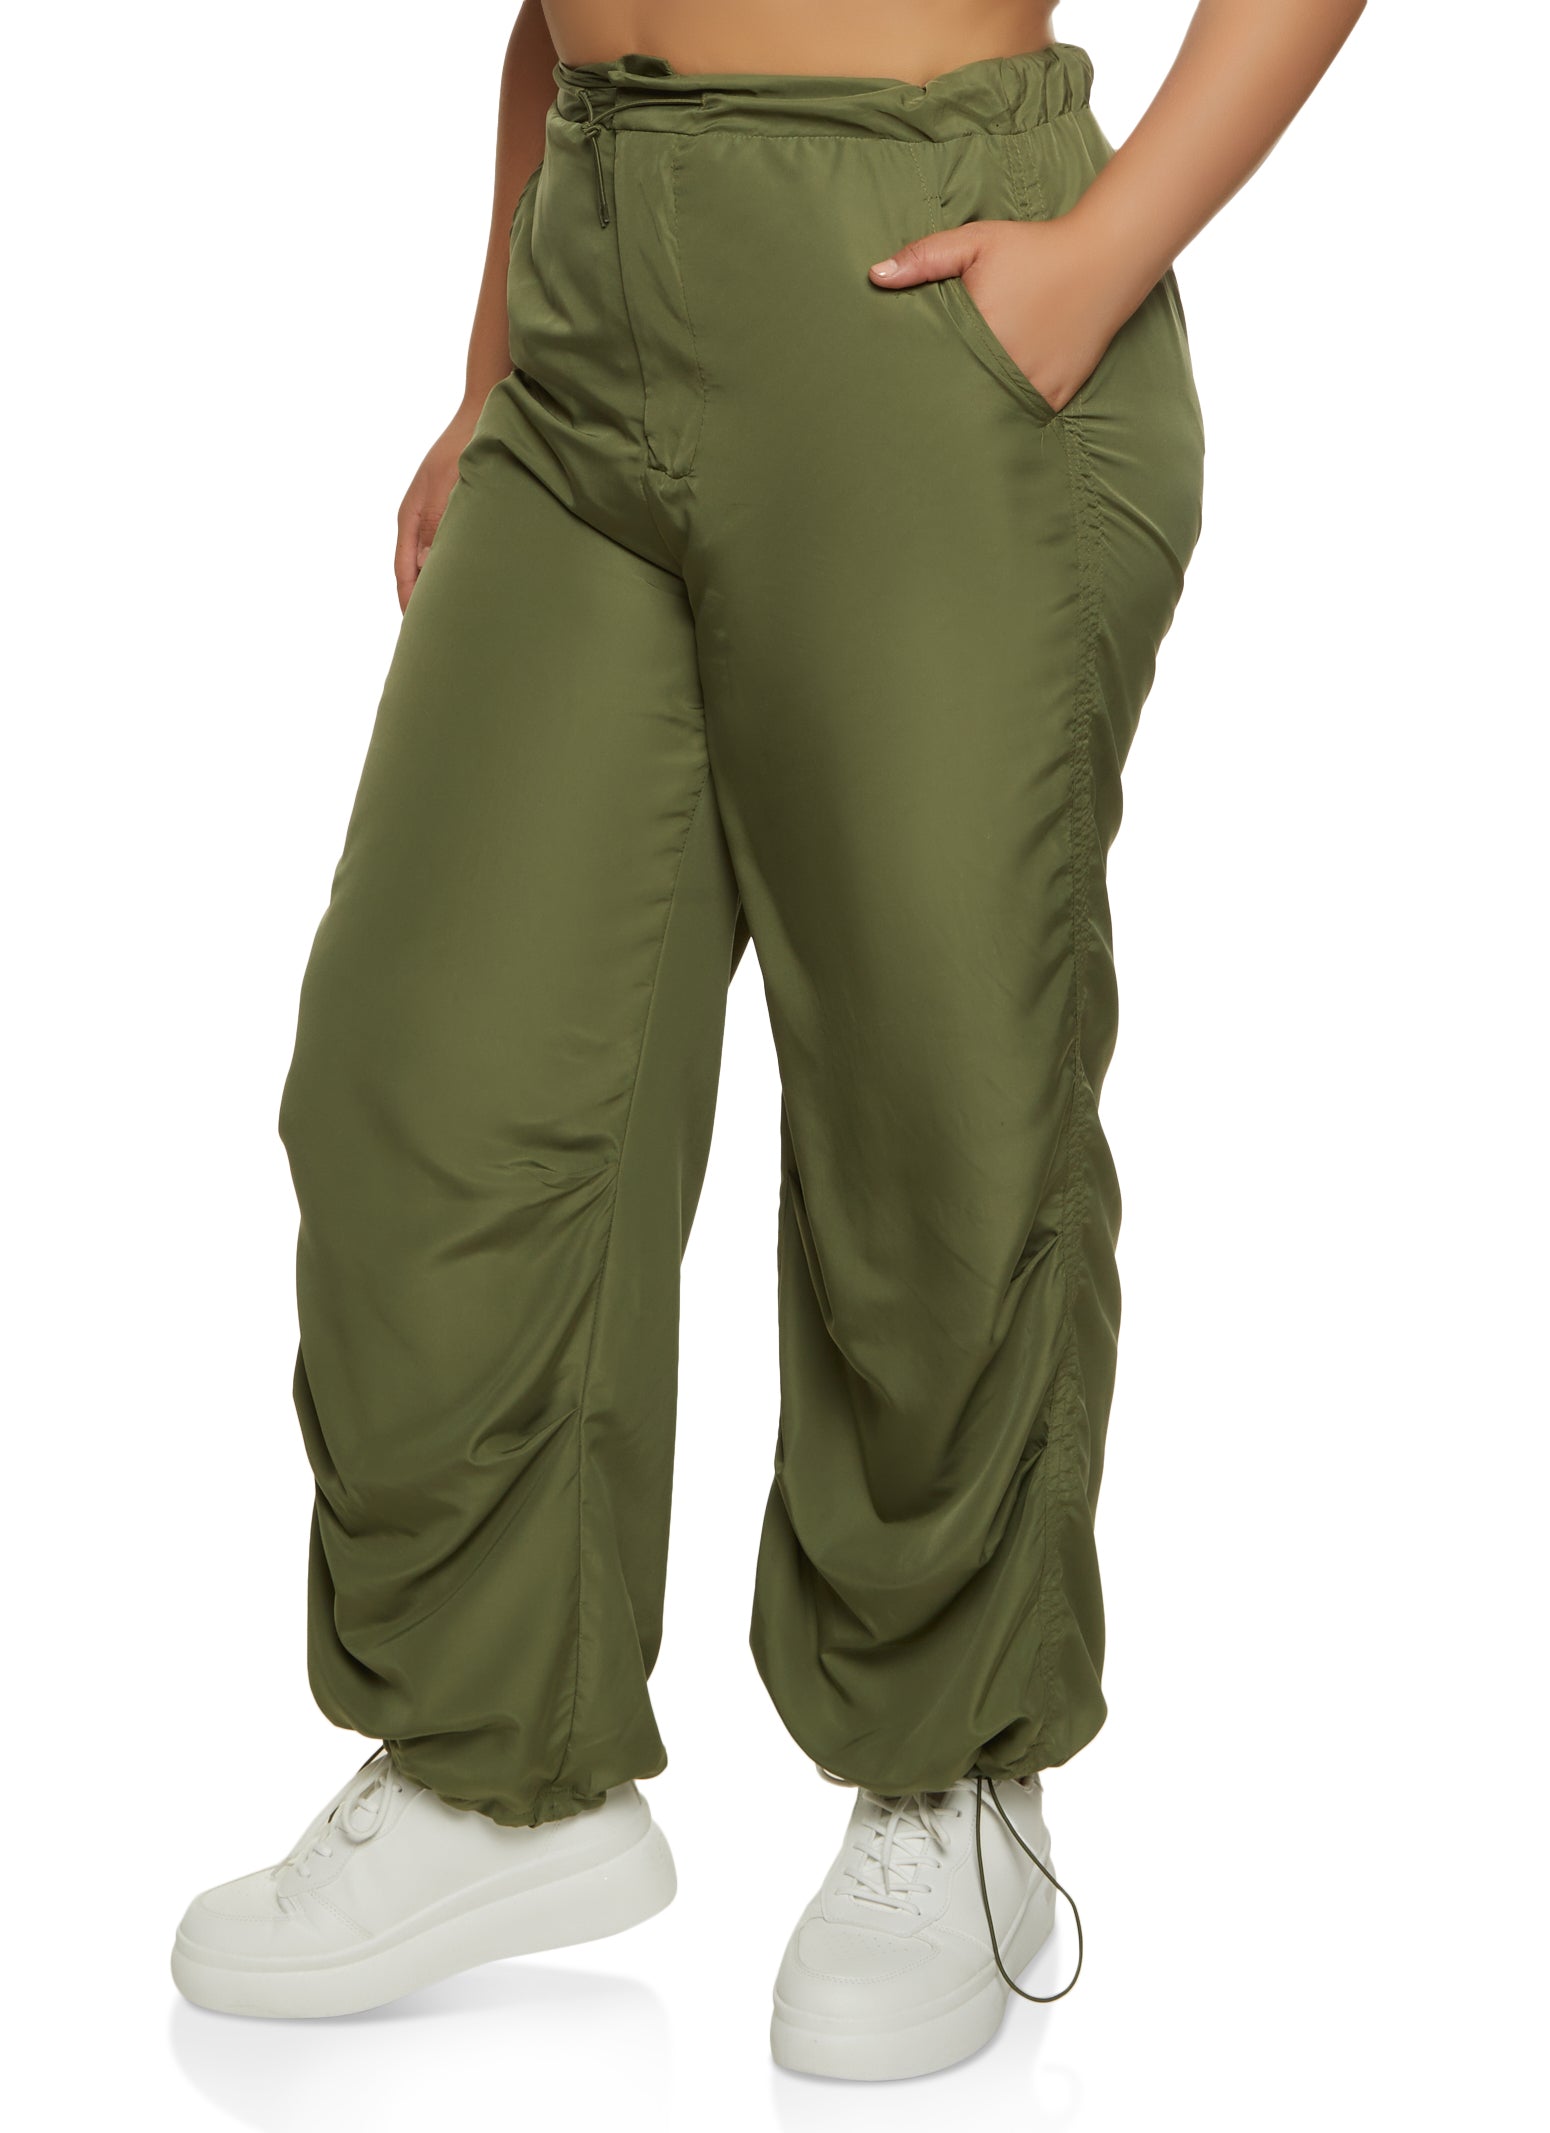 Metallic Silver Low Rise V-Cut Ruched Flare Pants  Metallic pants outfit,  Cargo pants women outfit, Metallic pants